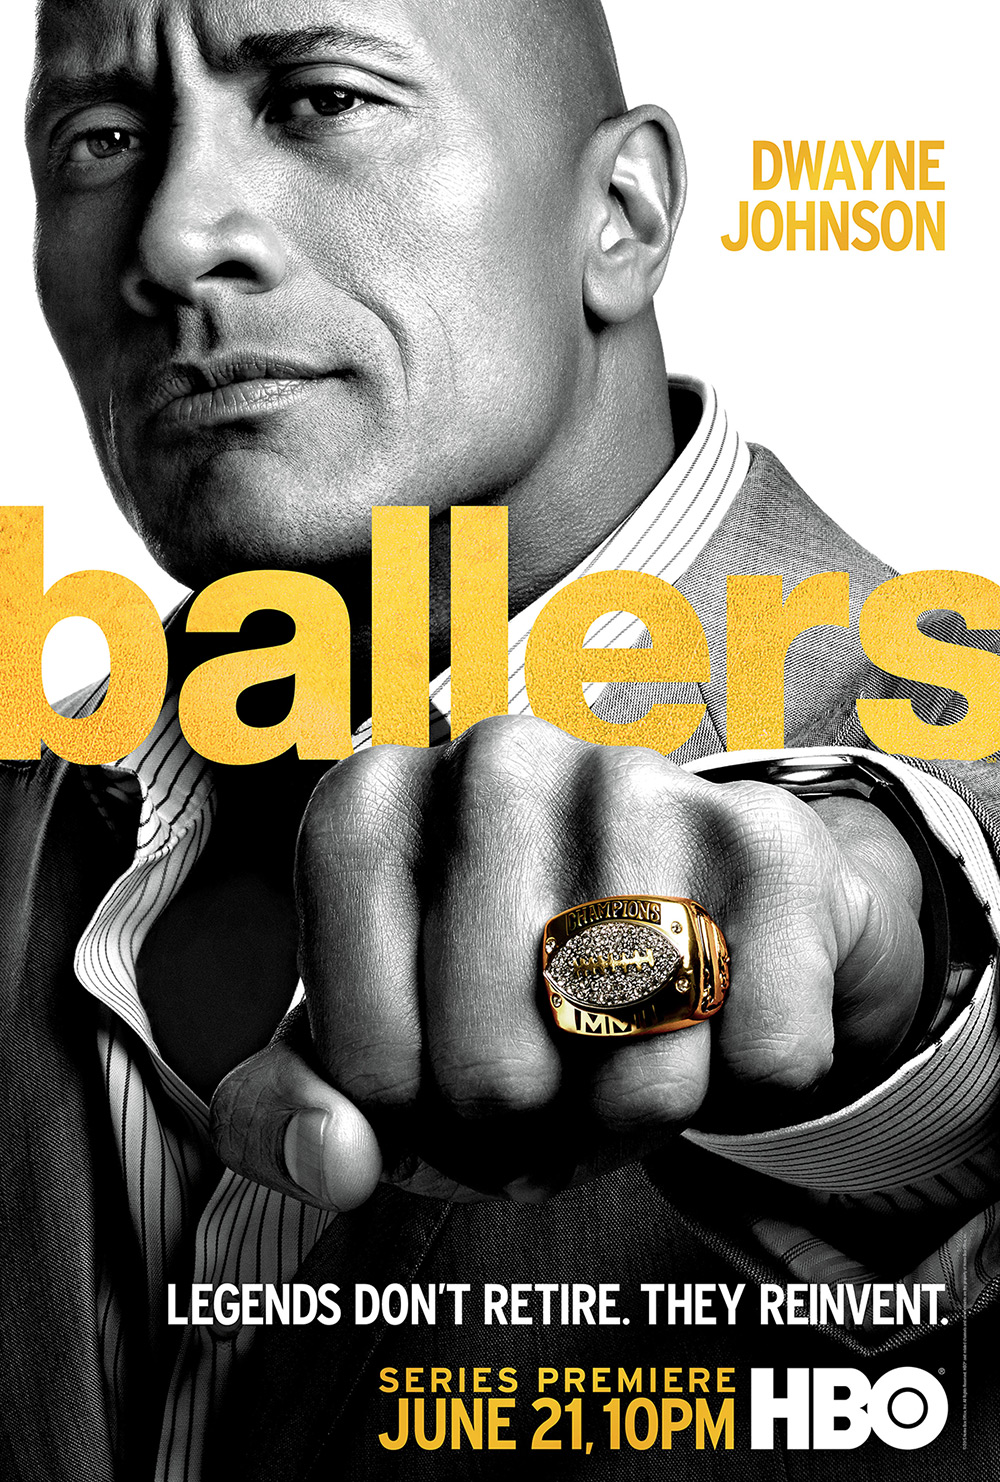 HBO - Ballers